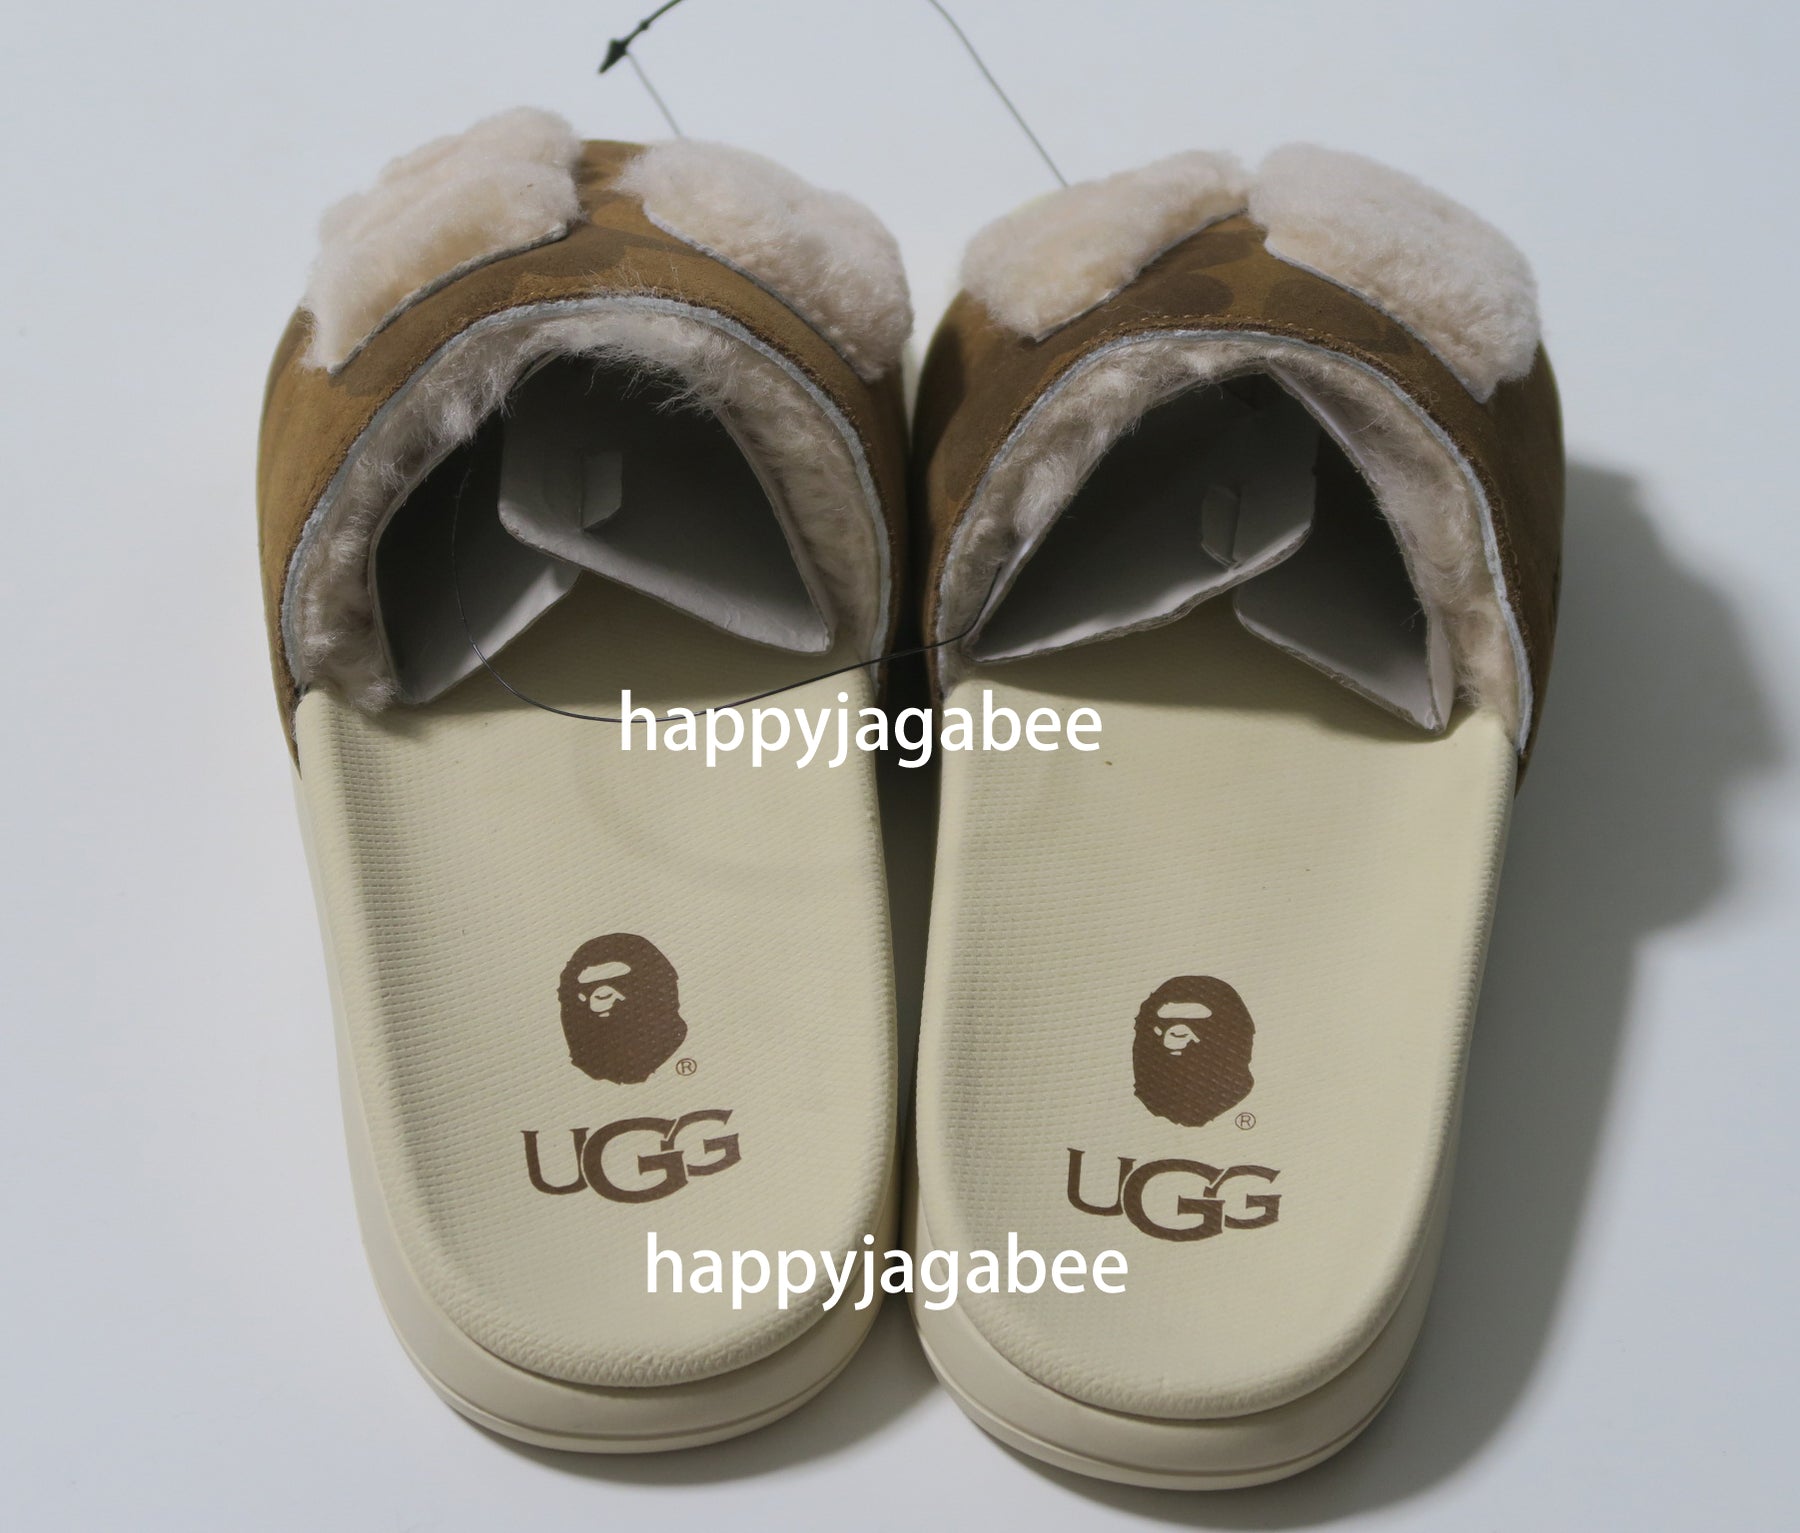 ugg slippers in store